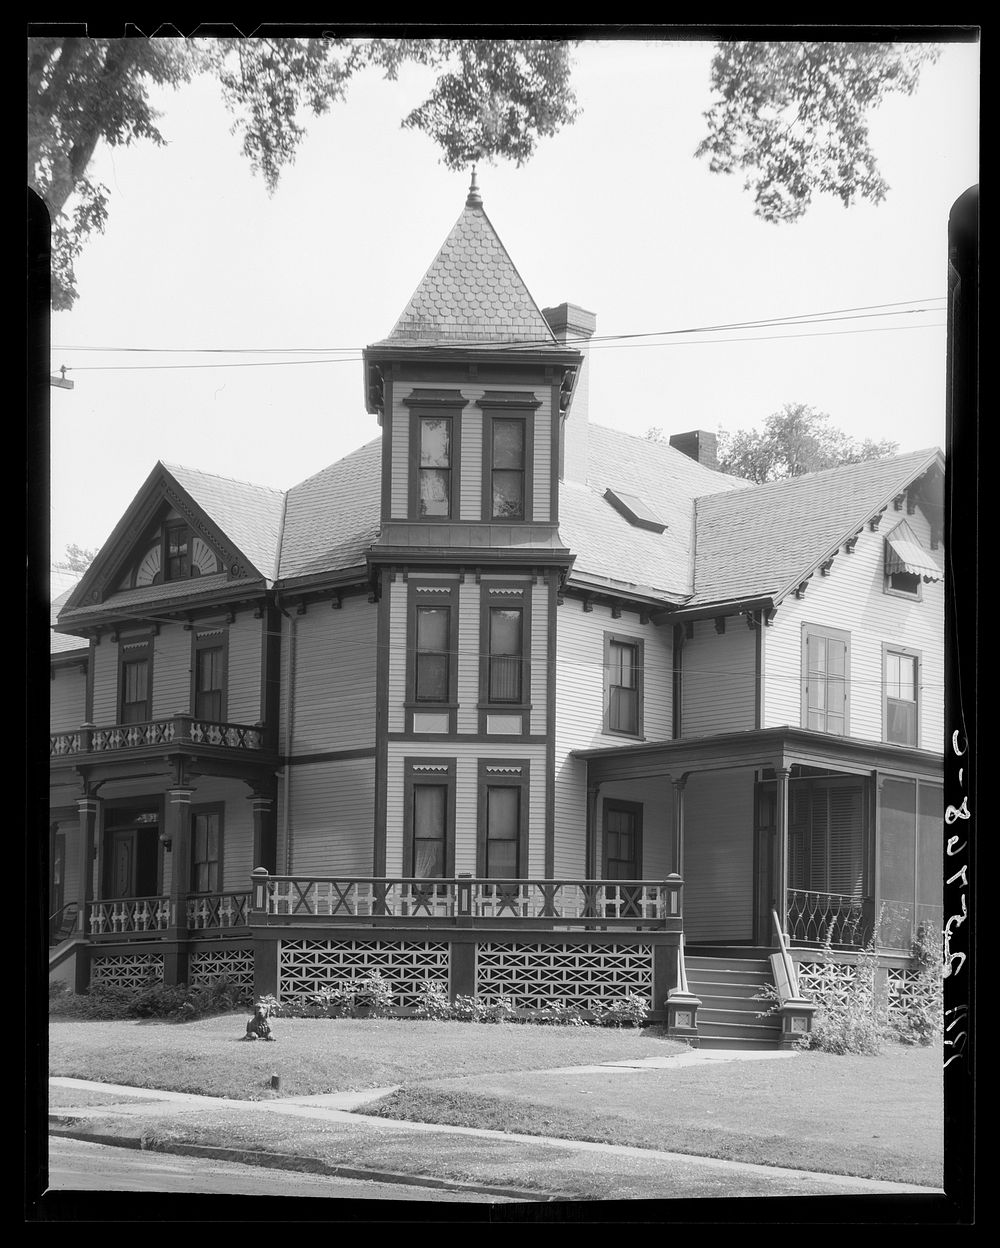 House. Burlington, Vermont. Sourced from the Library of Congress.